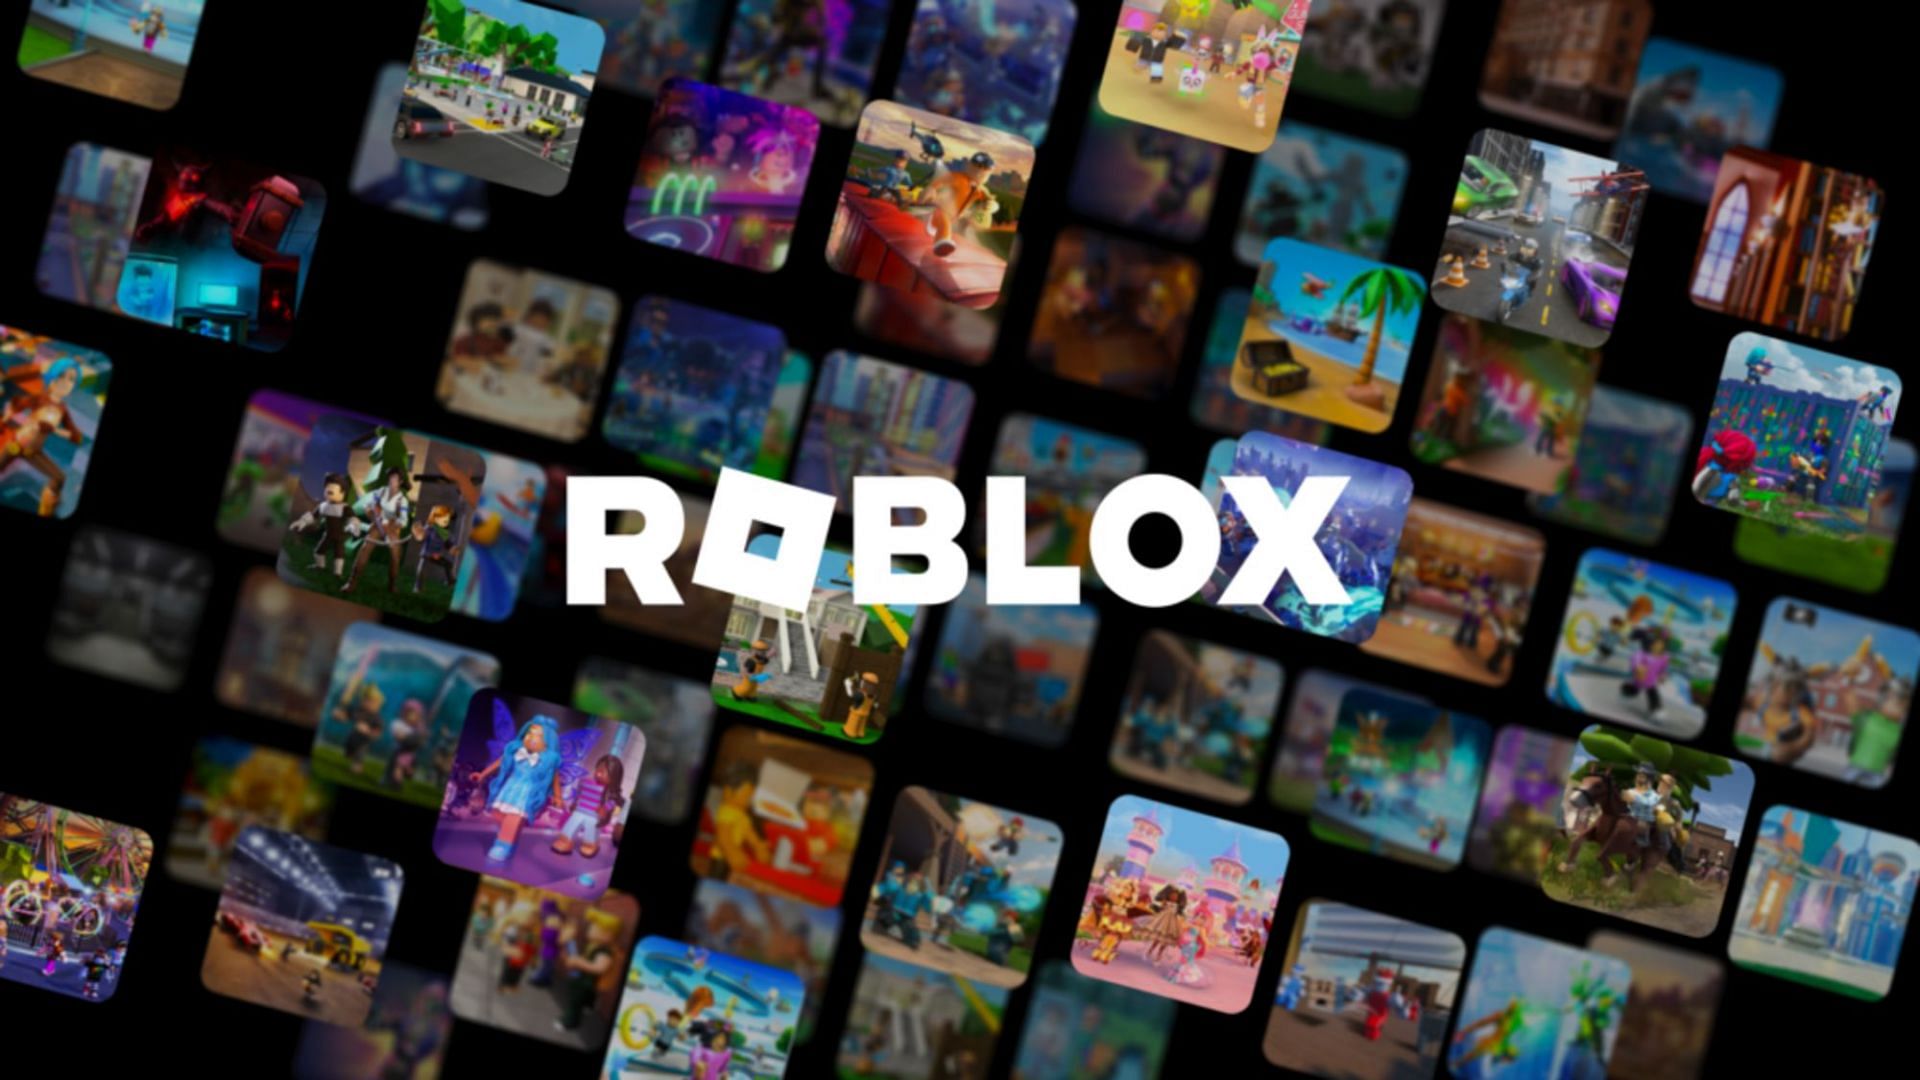 Top 5 most underrated games on Roblox in 2022